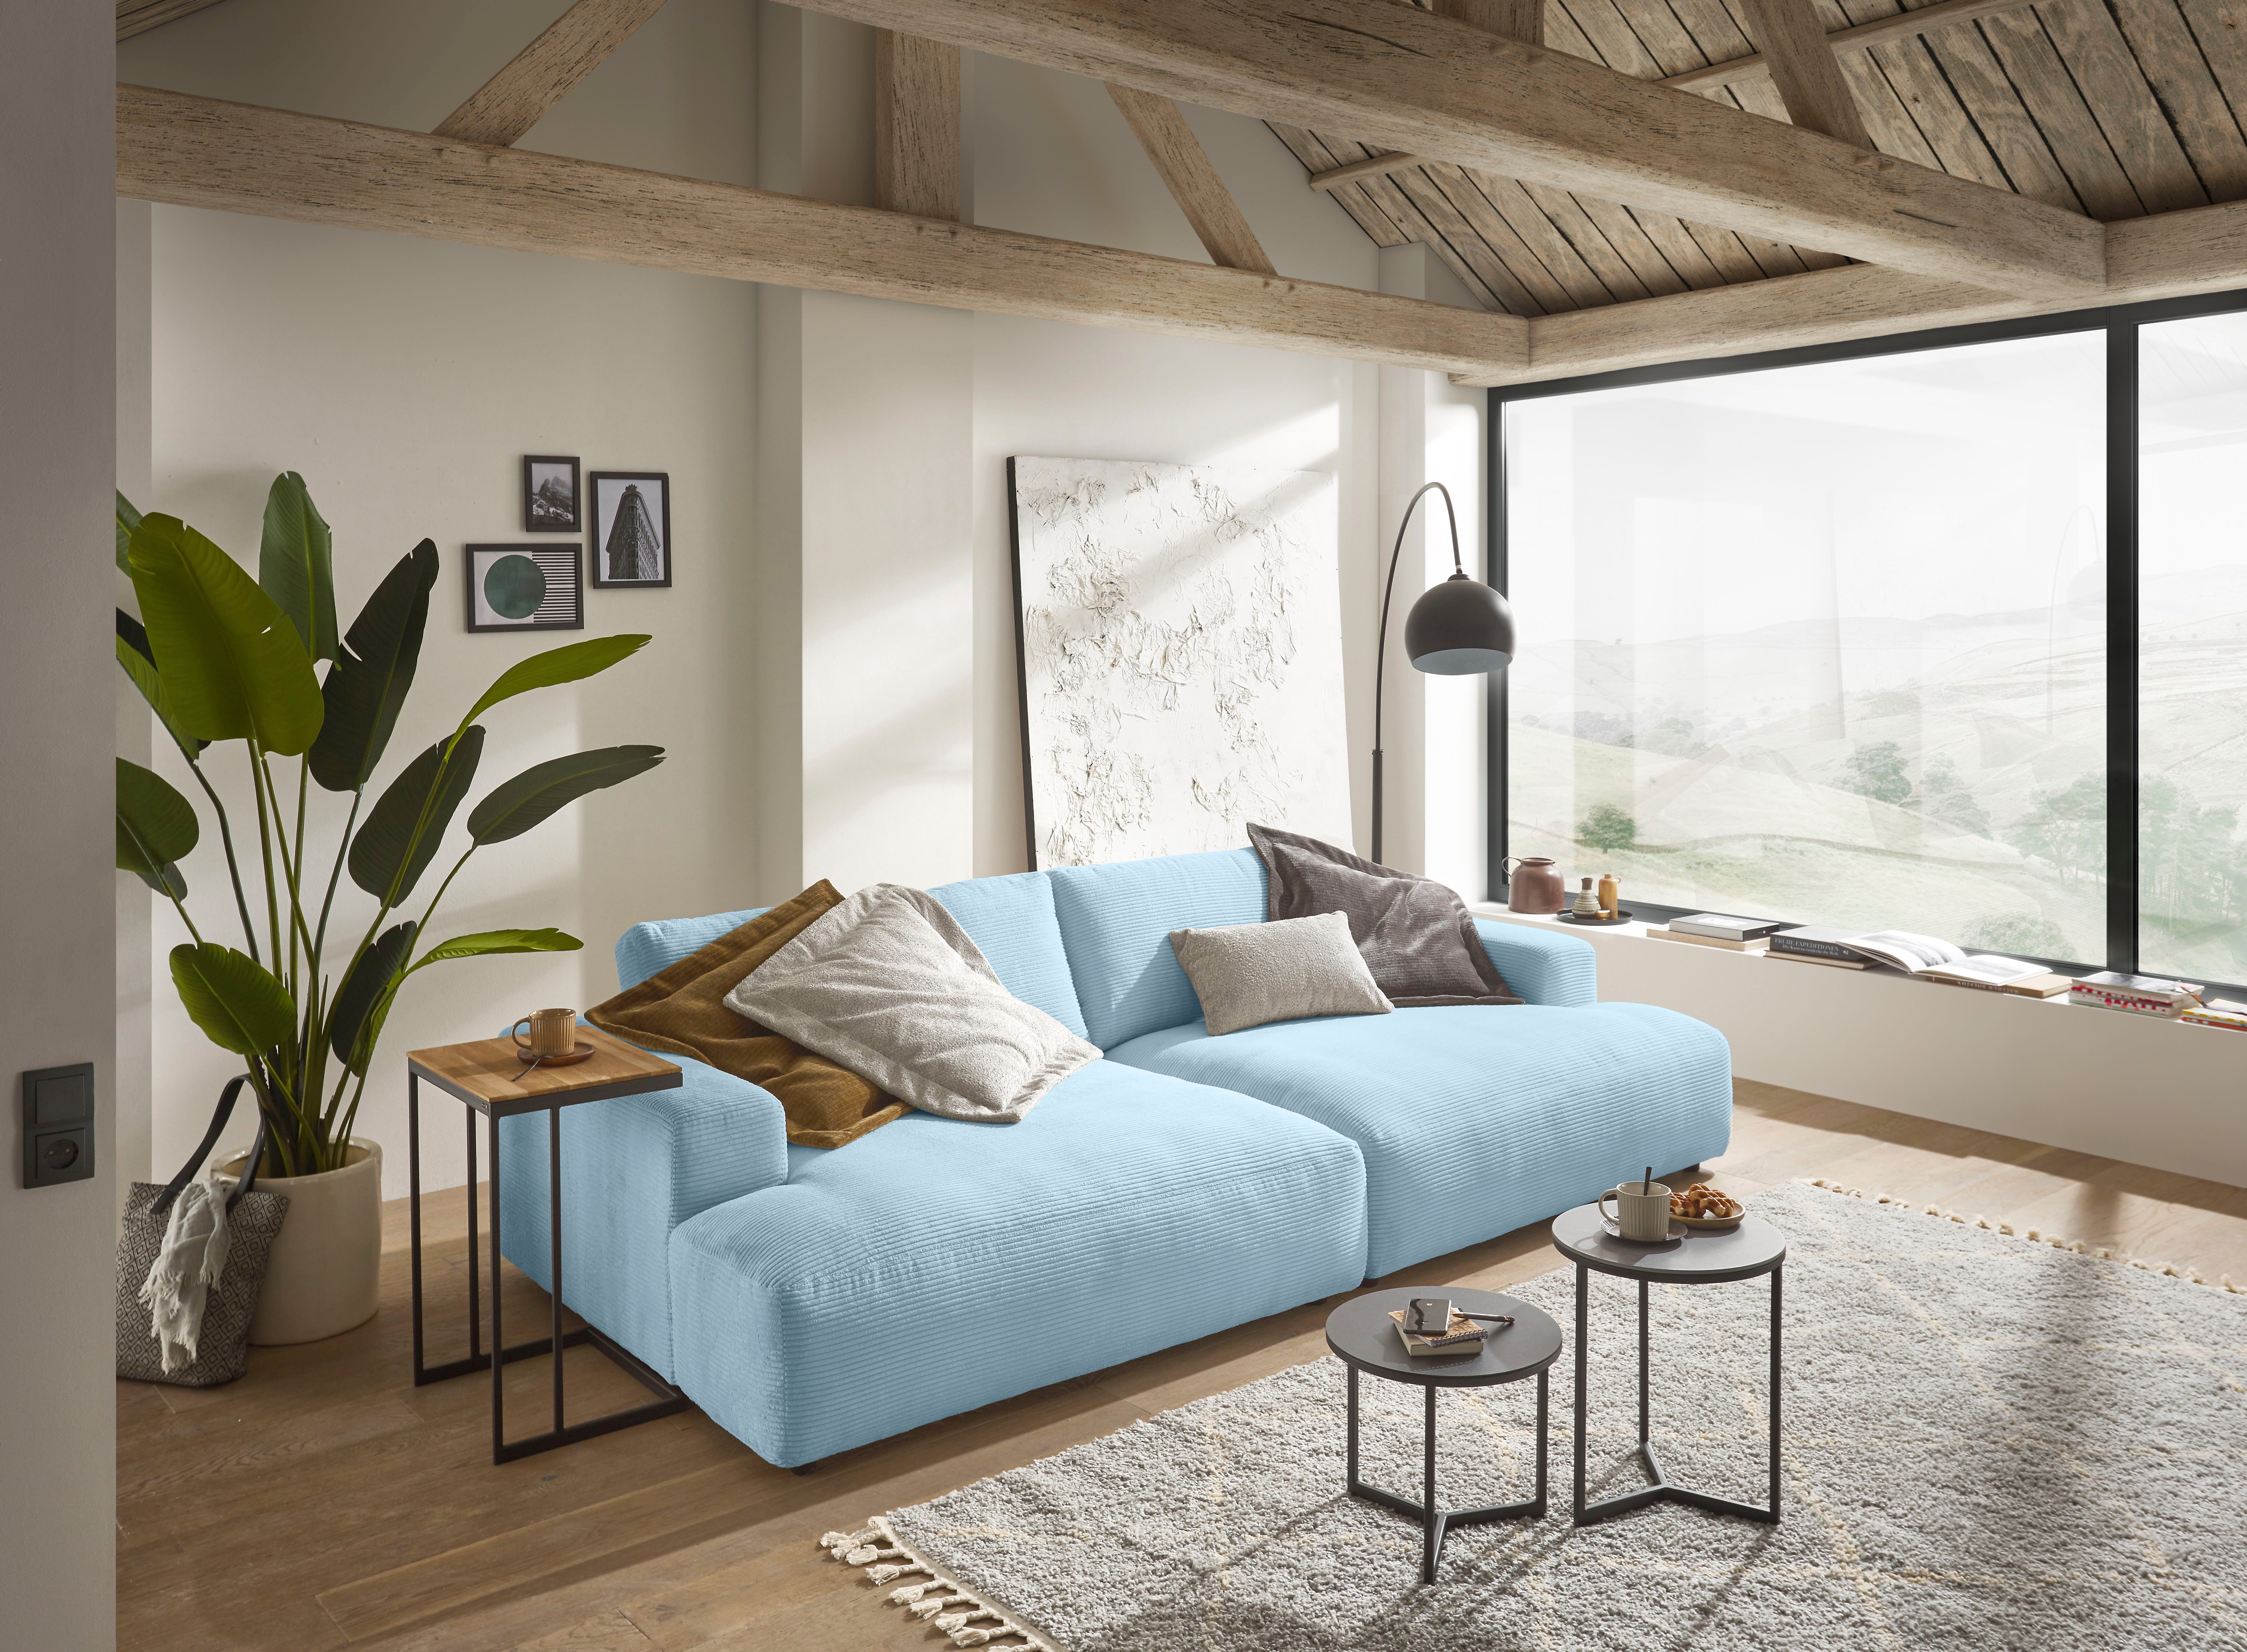 Cord-Bezug, by Breite Loungesofa cm light-blue Musterring 292 GALLERY M Lucia, branded